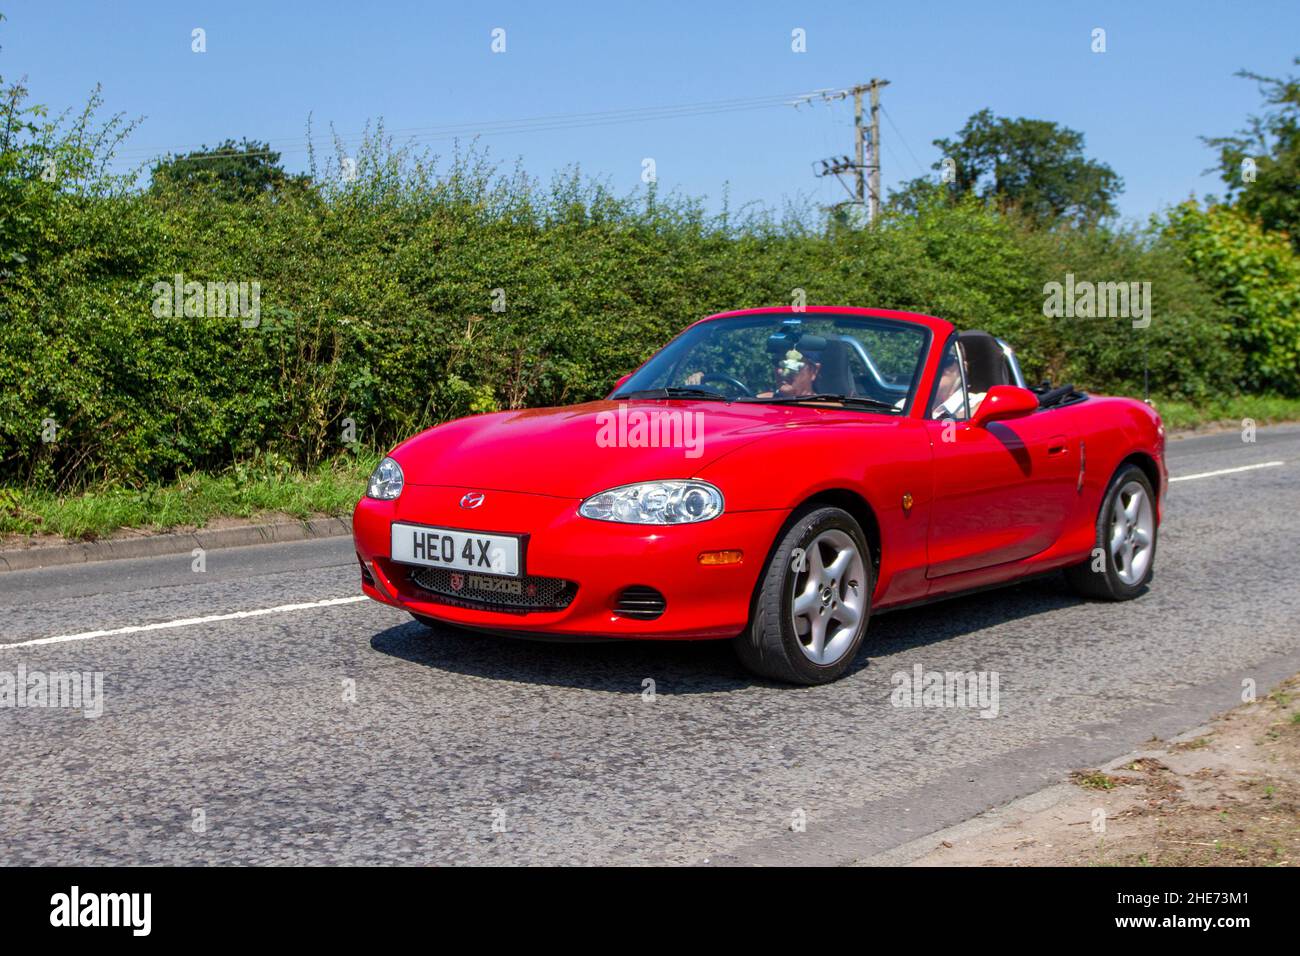 2002 red Mazda MX-5 i, 1598cc 5 speed manual en-route to Capesthorne Hall classic July car show, Cheshire, UK Stock Photo